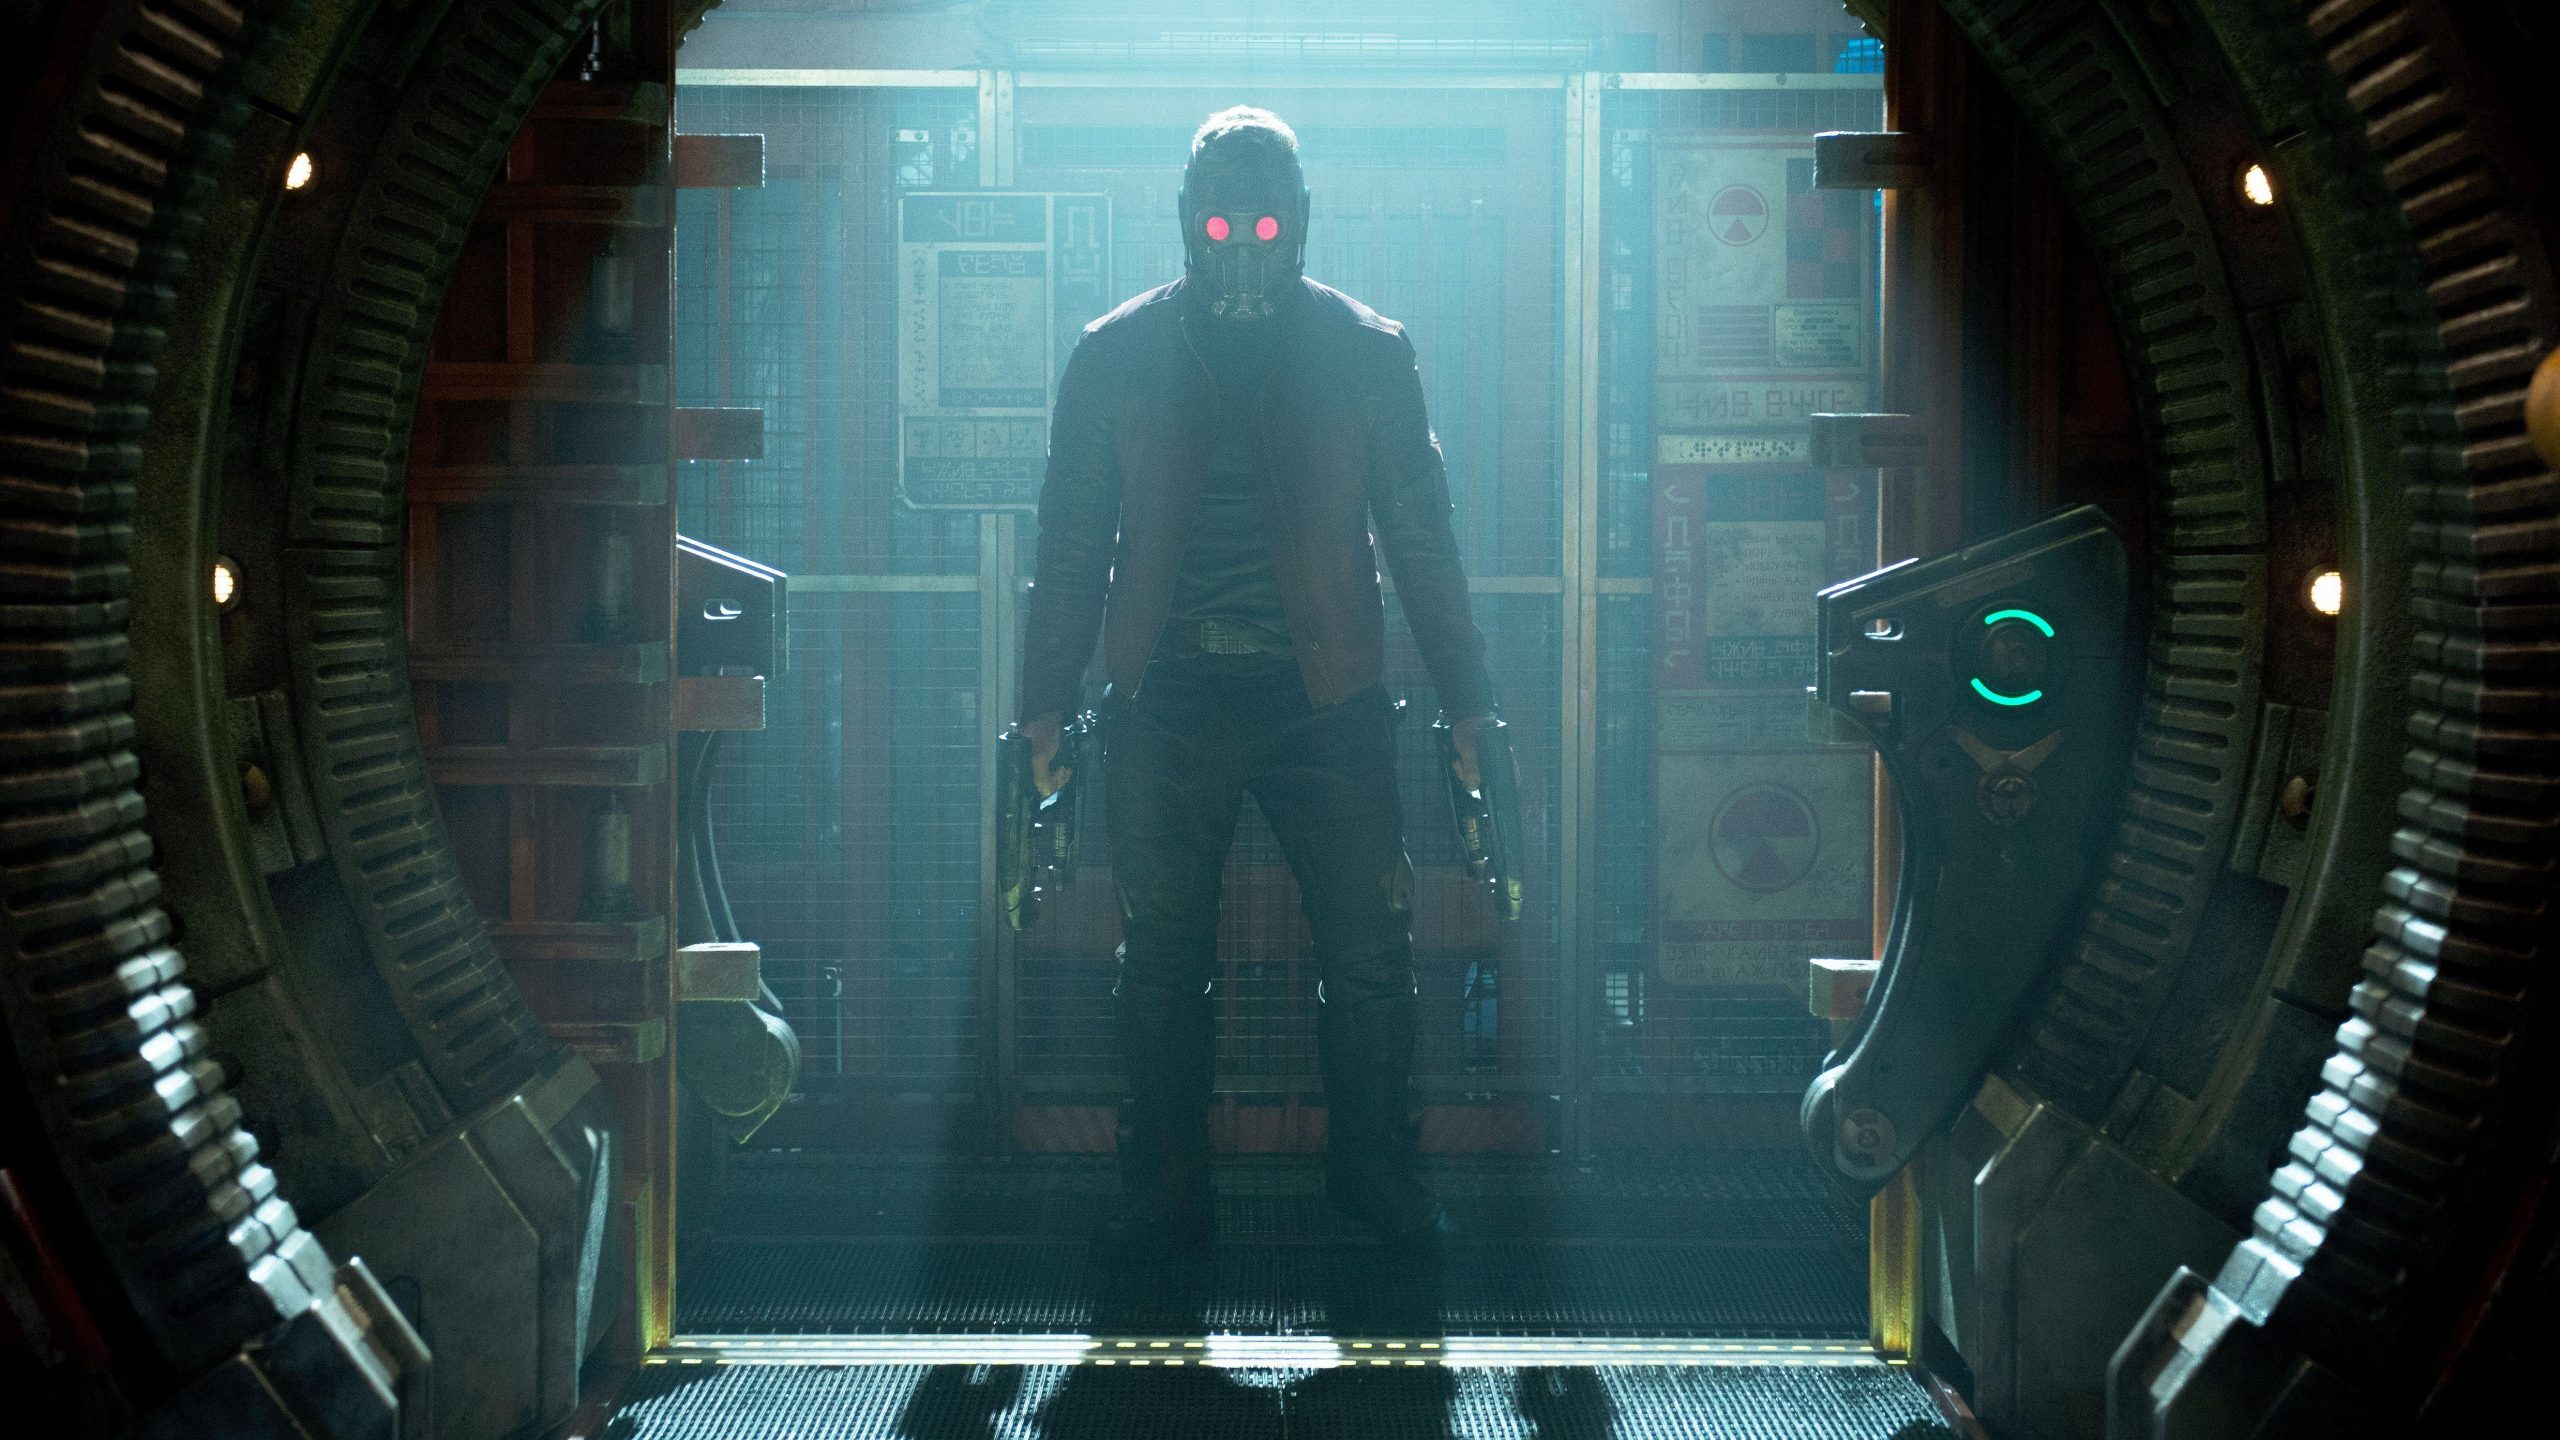 Guardians Of The Galaxy Star-Lord background wallpaper, Guardians Of The Galaxy Star-Lord, Movies